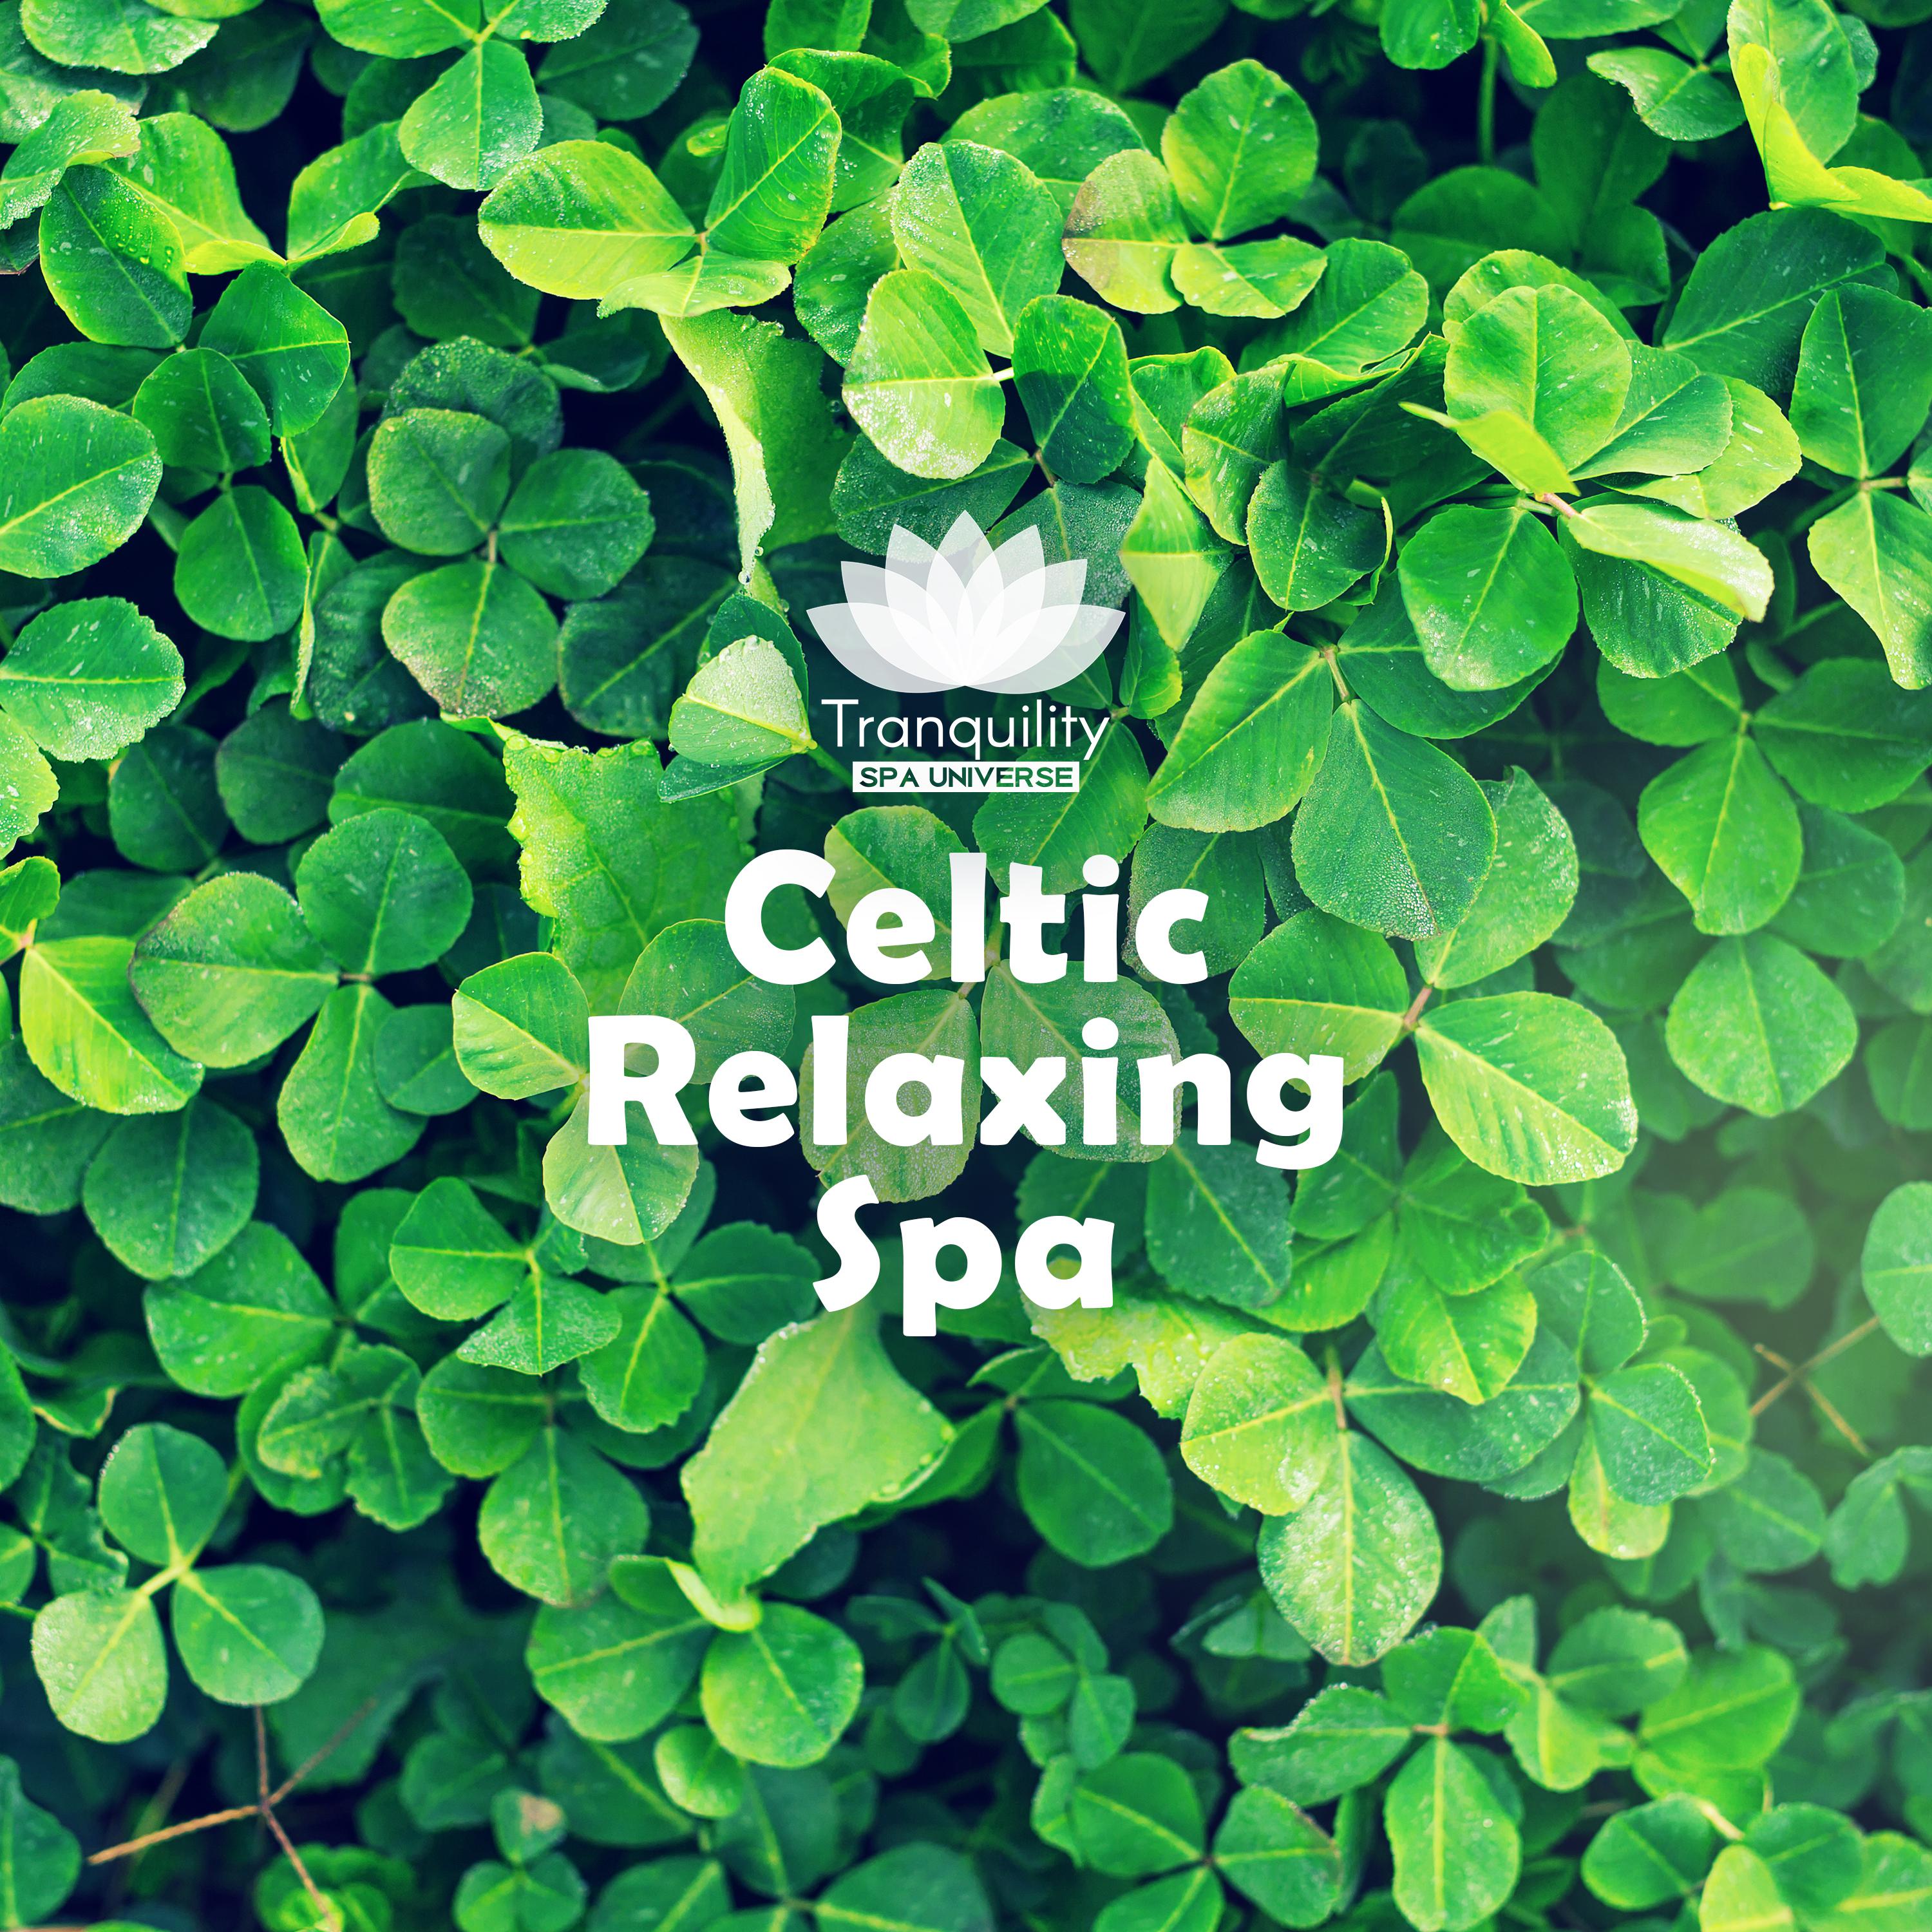 Celtic Relaxing Spa